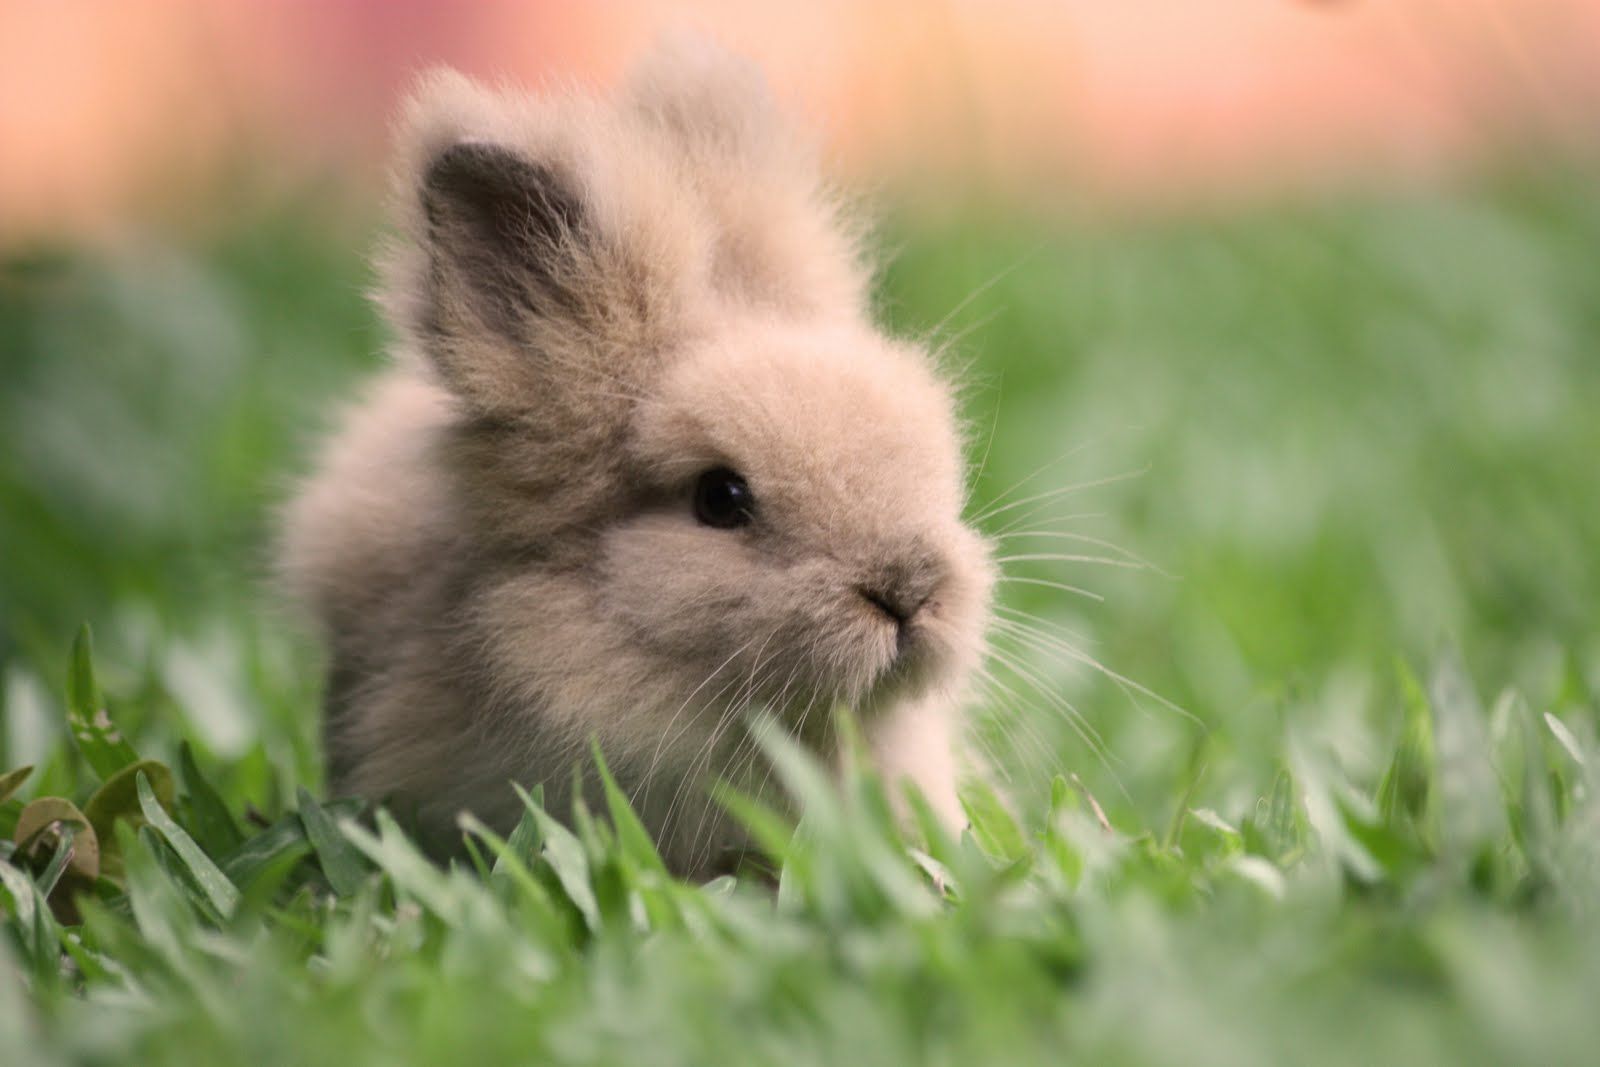 Bunnies. Cute bunny picture, Cute animals, Fluffy animals